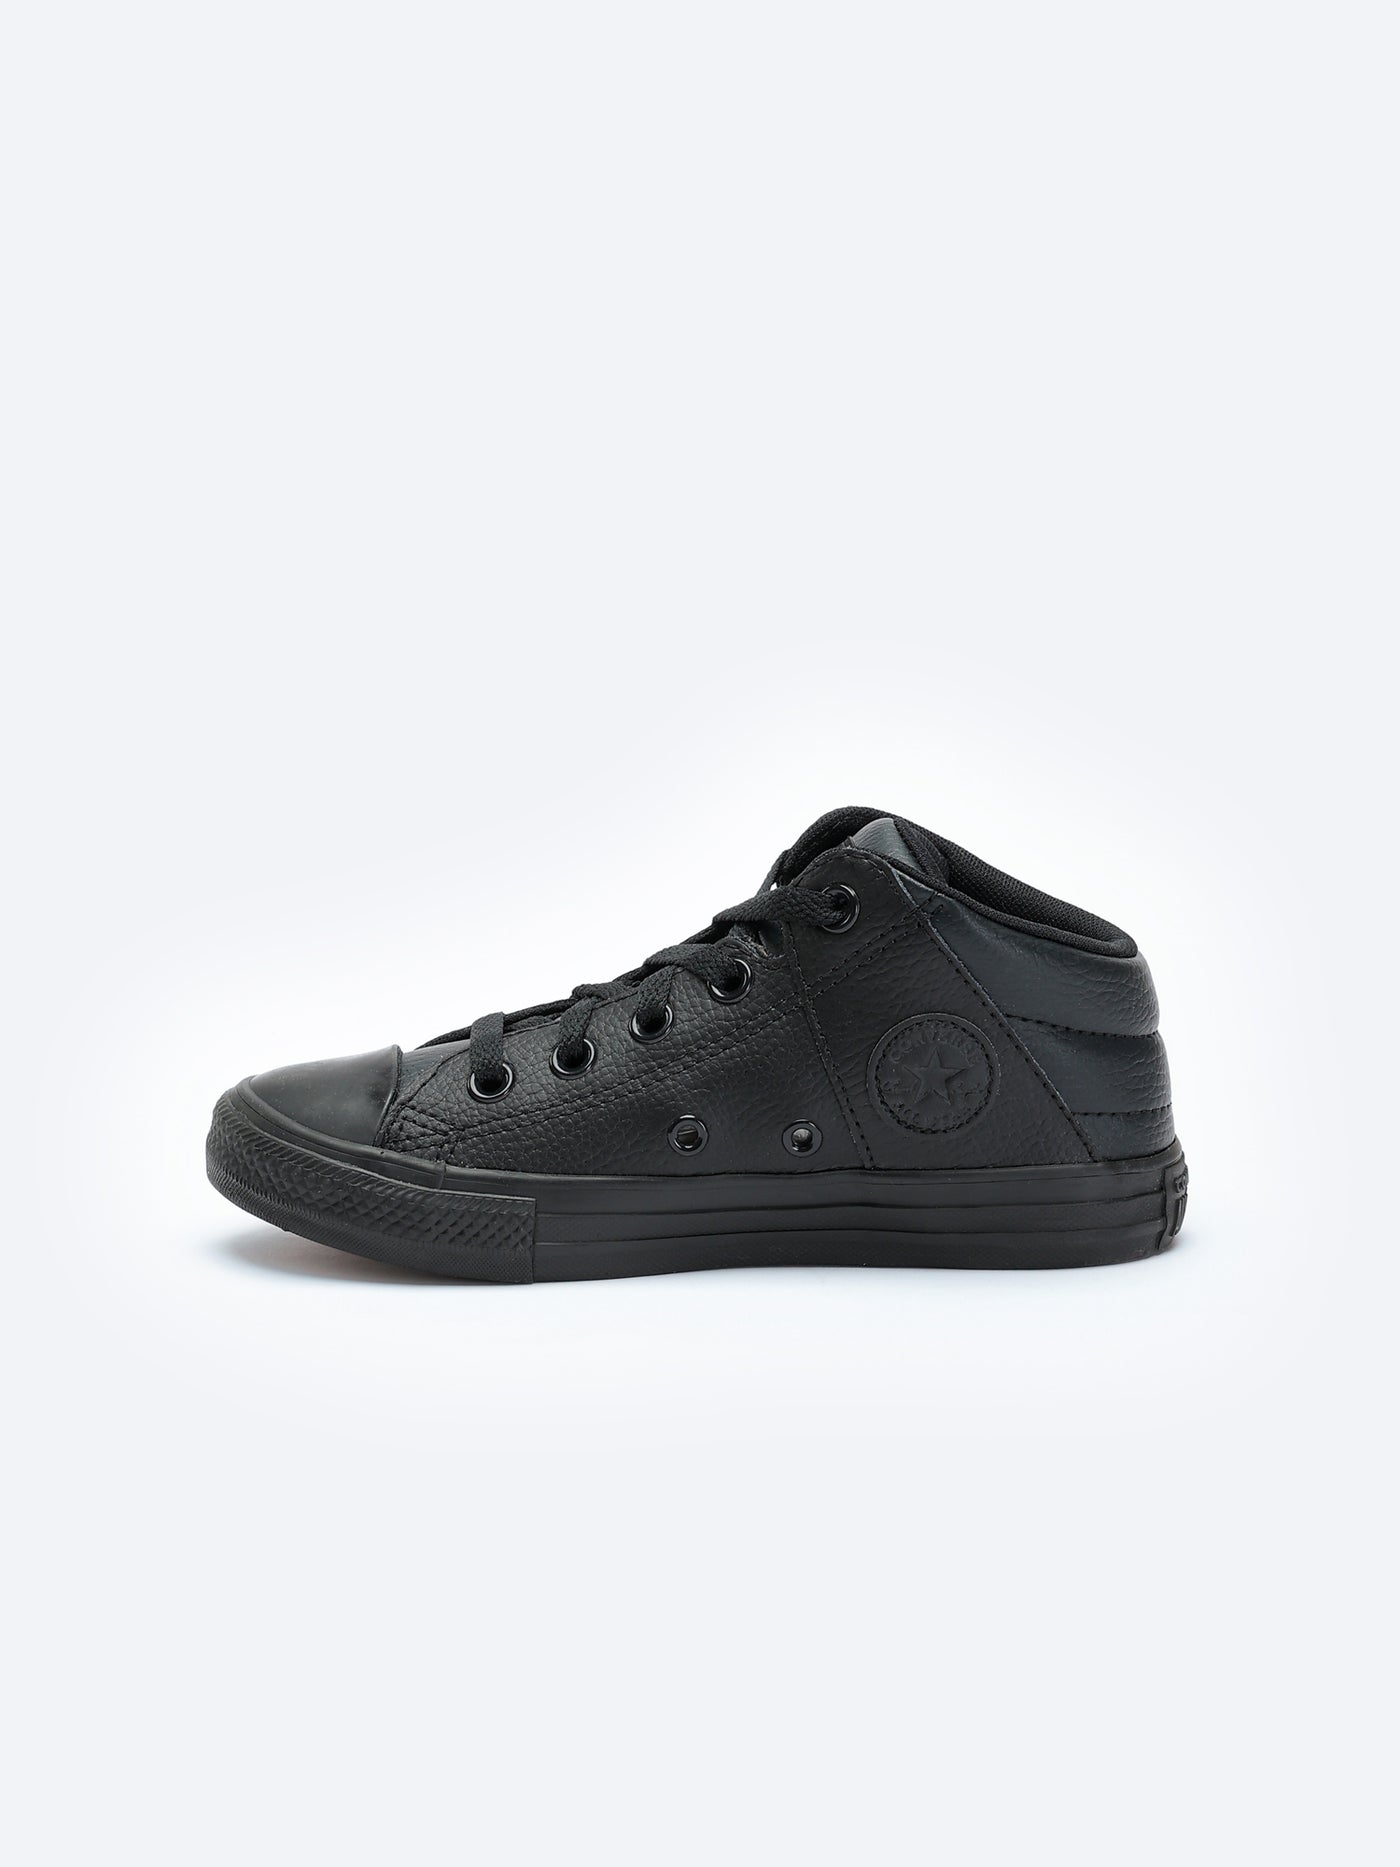 Converse Kids Axel Foundational Leather Sneakers